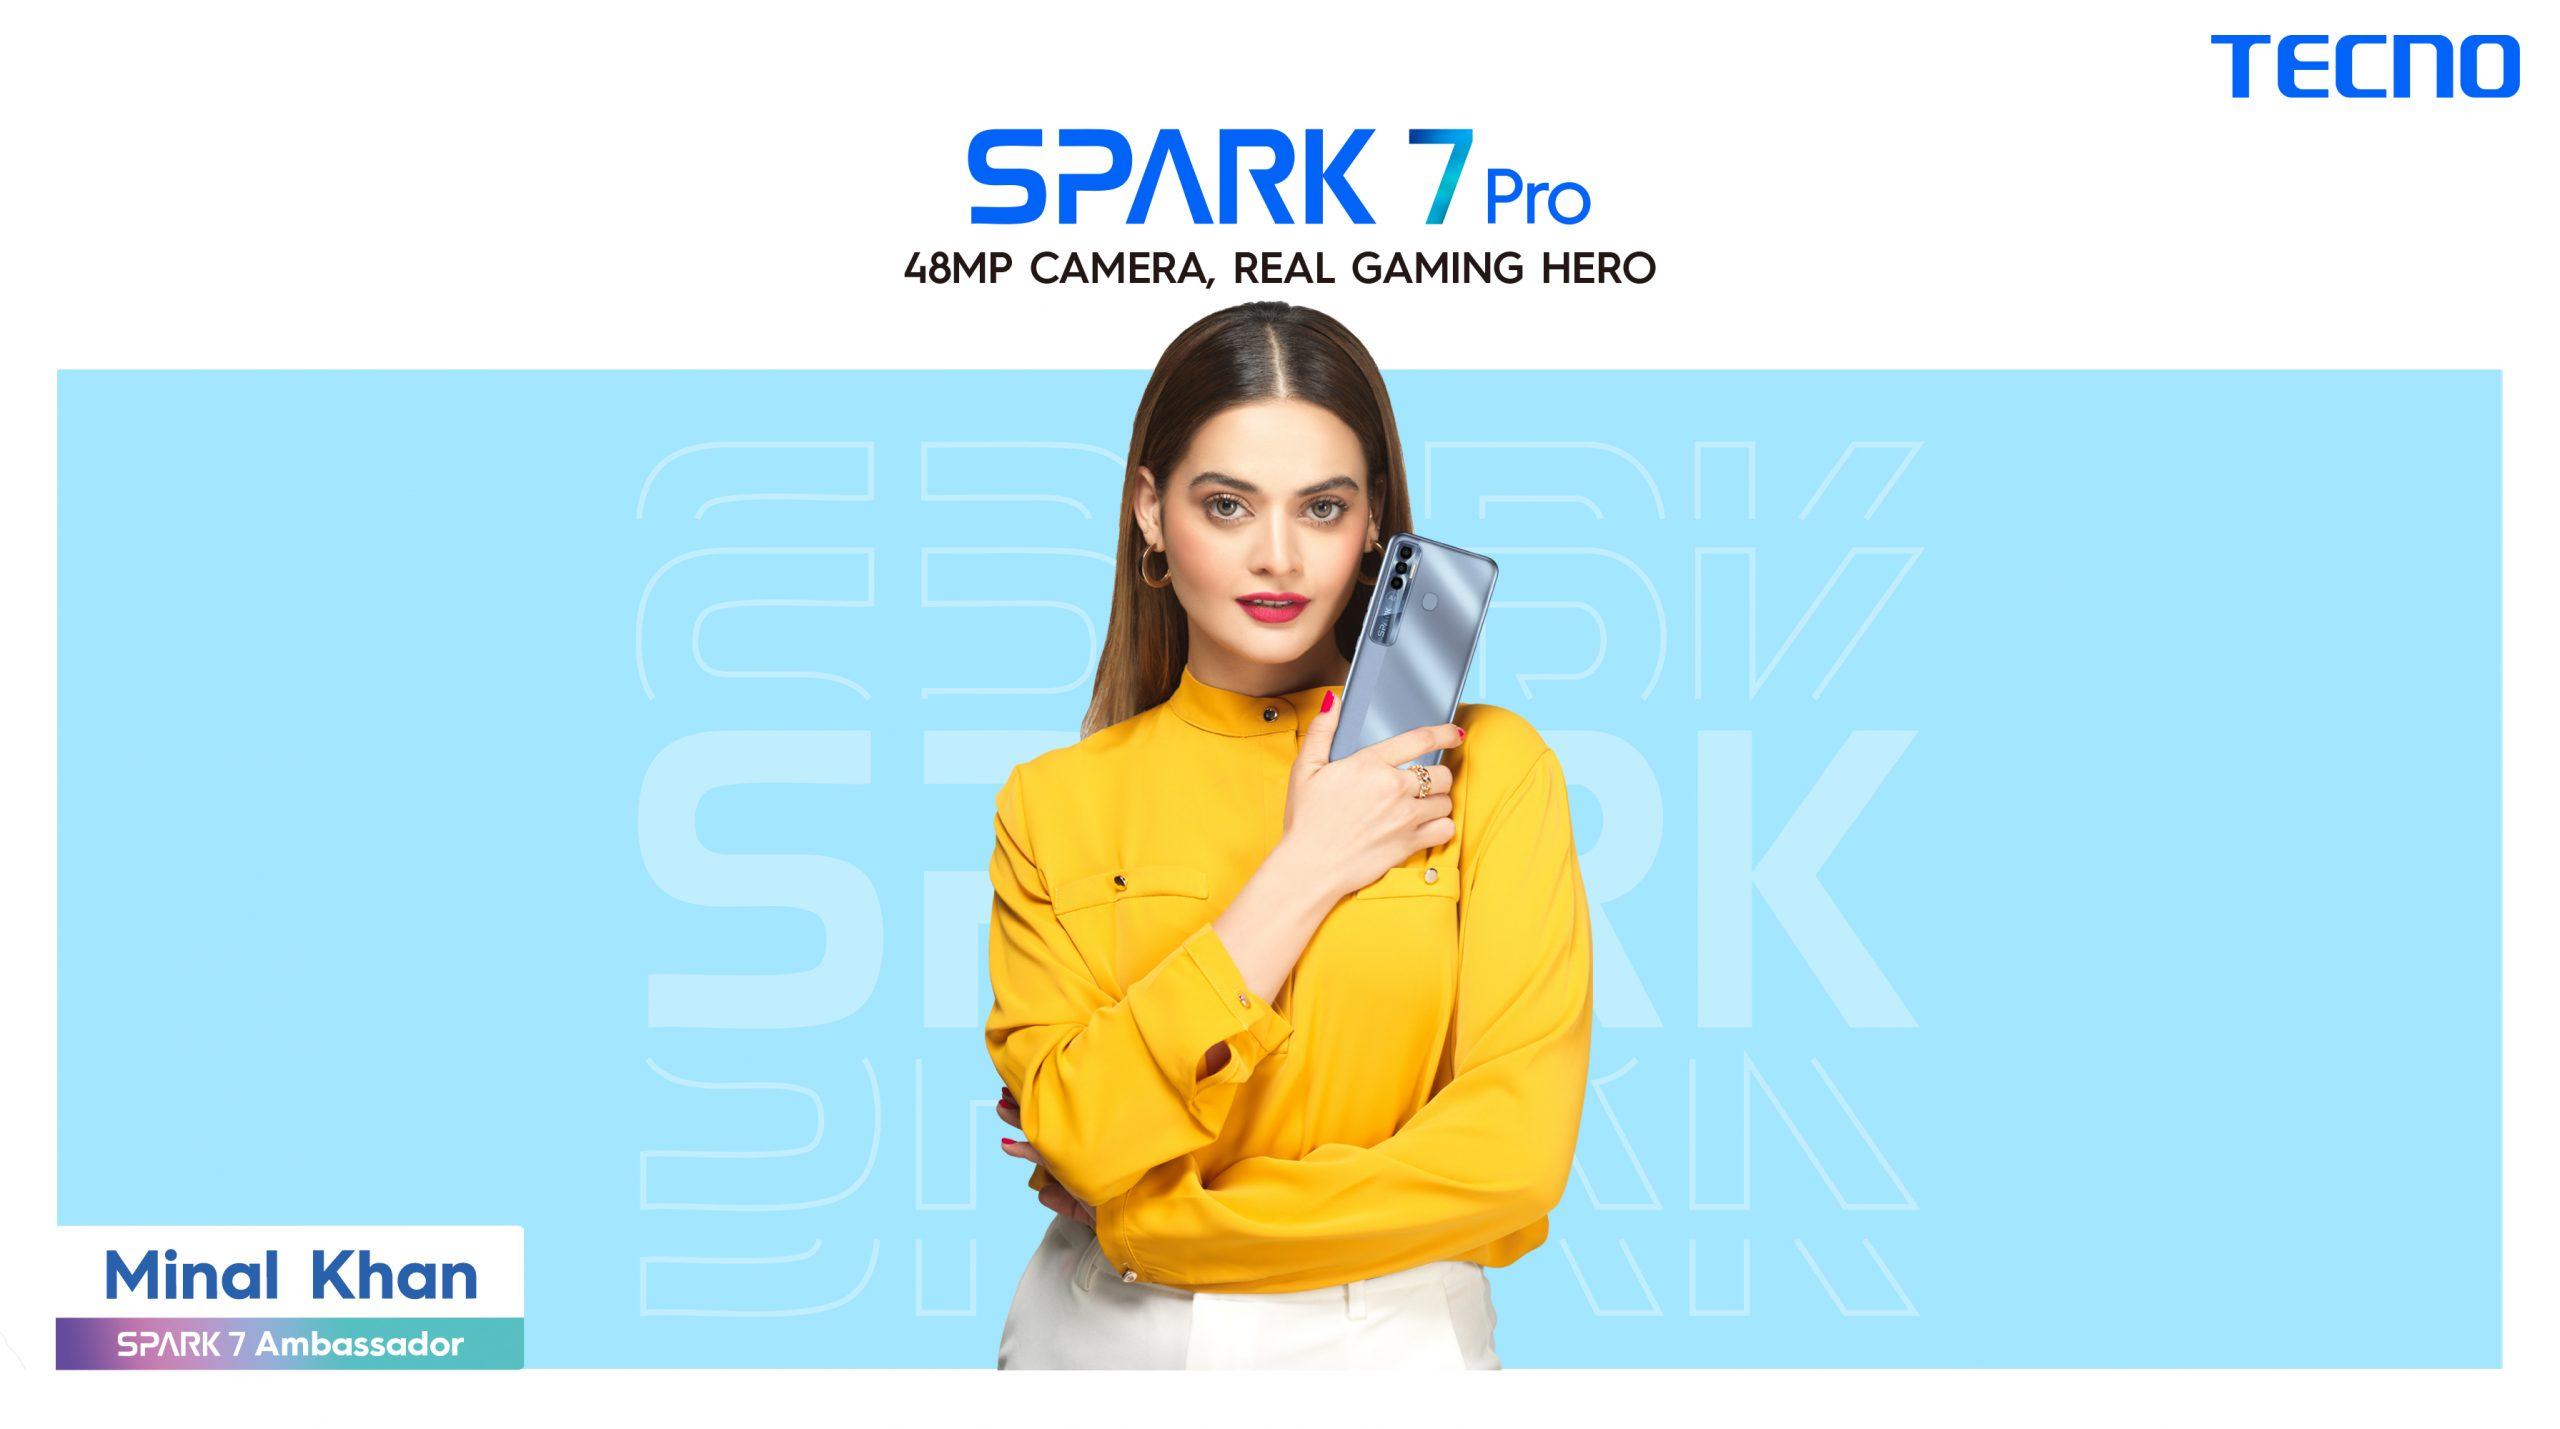 TECNO has set another milestone with the Spark 7 Pro Launch in Pakistan